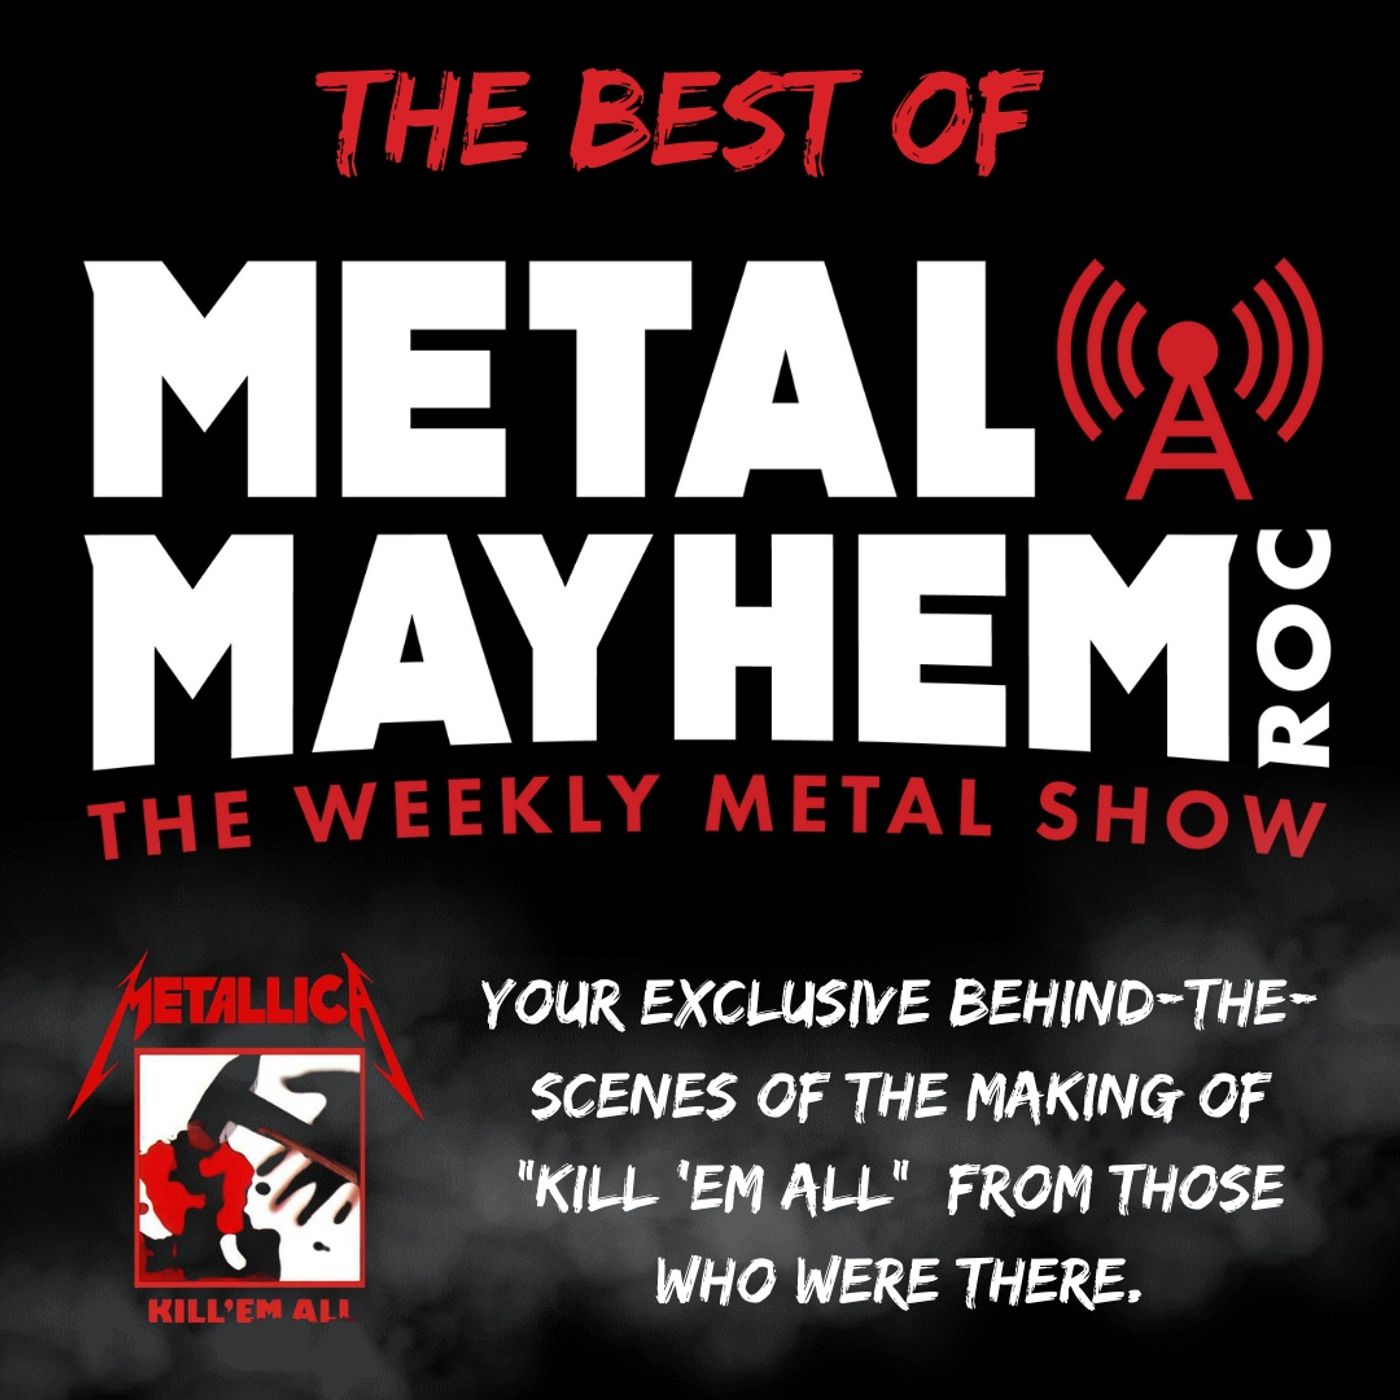 Metal Mayhem ROC - Your Exclusive behind the scenes of the making of Kill em All from those who were There.